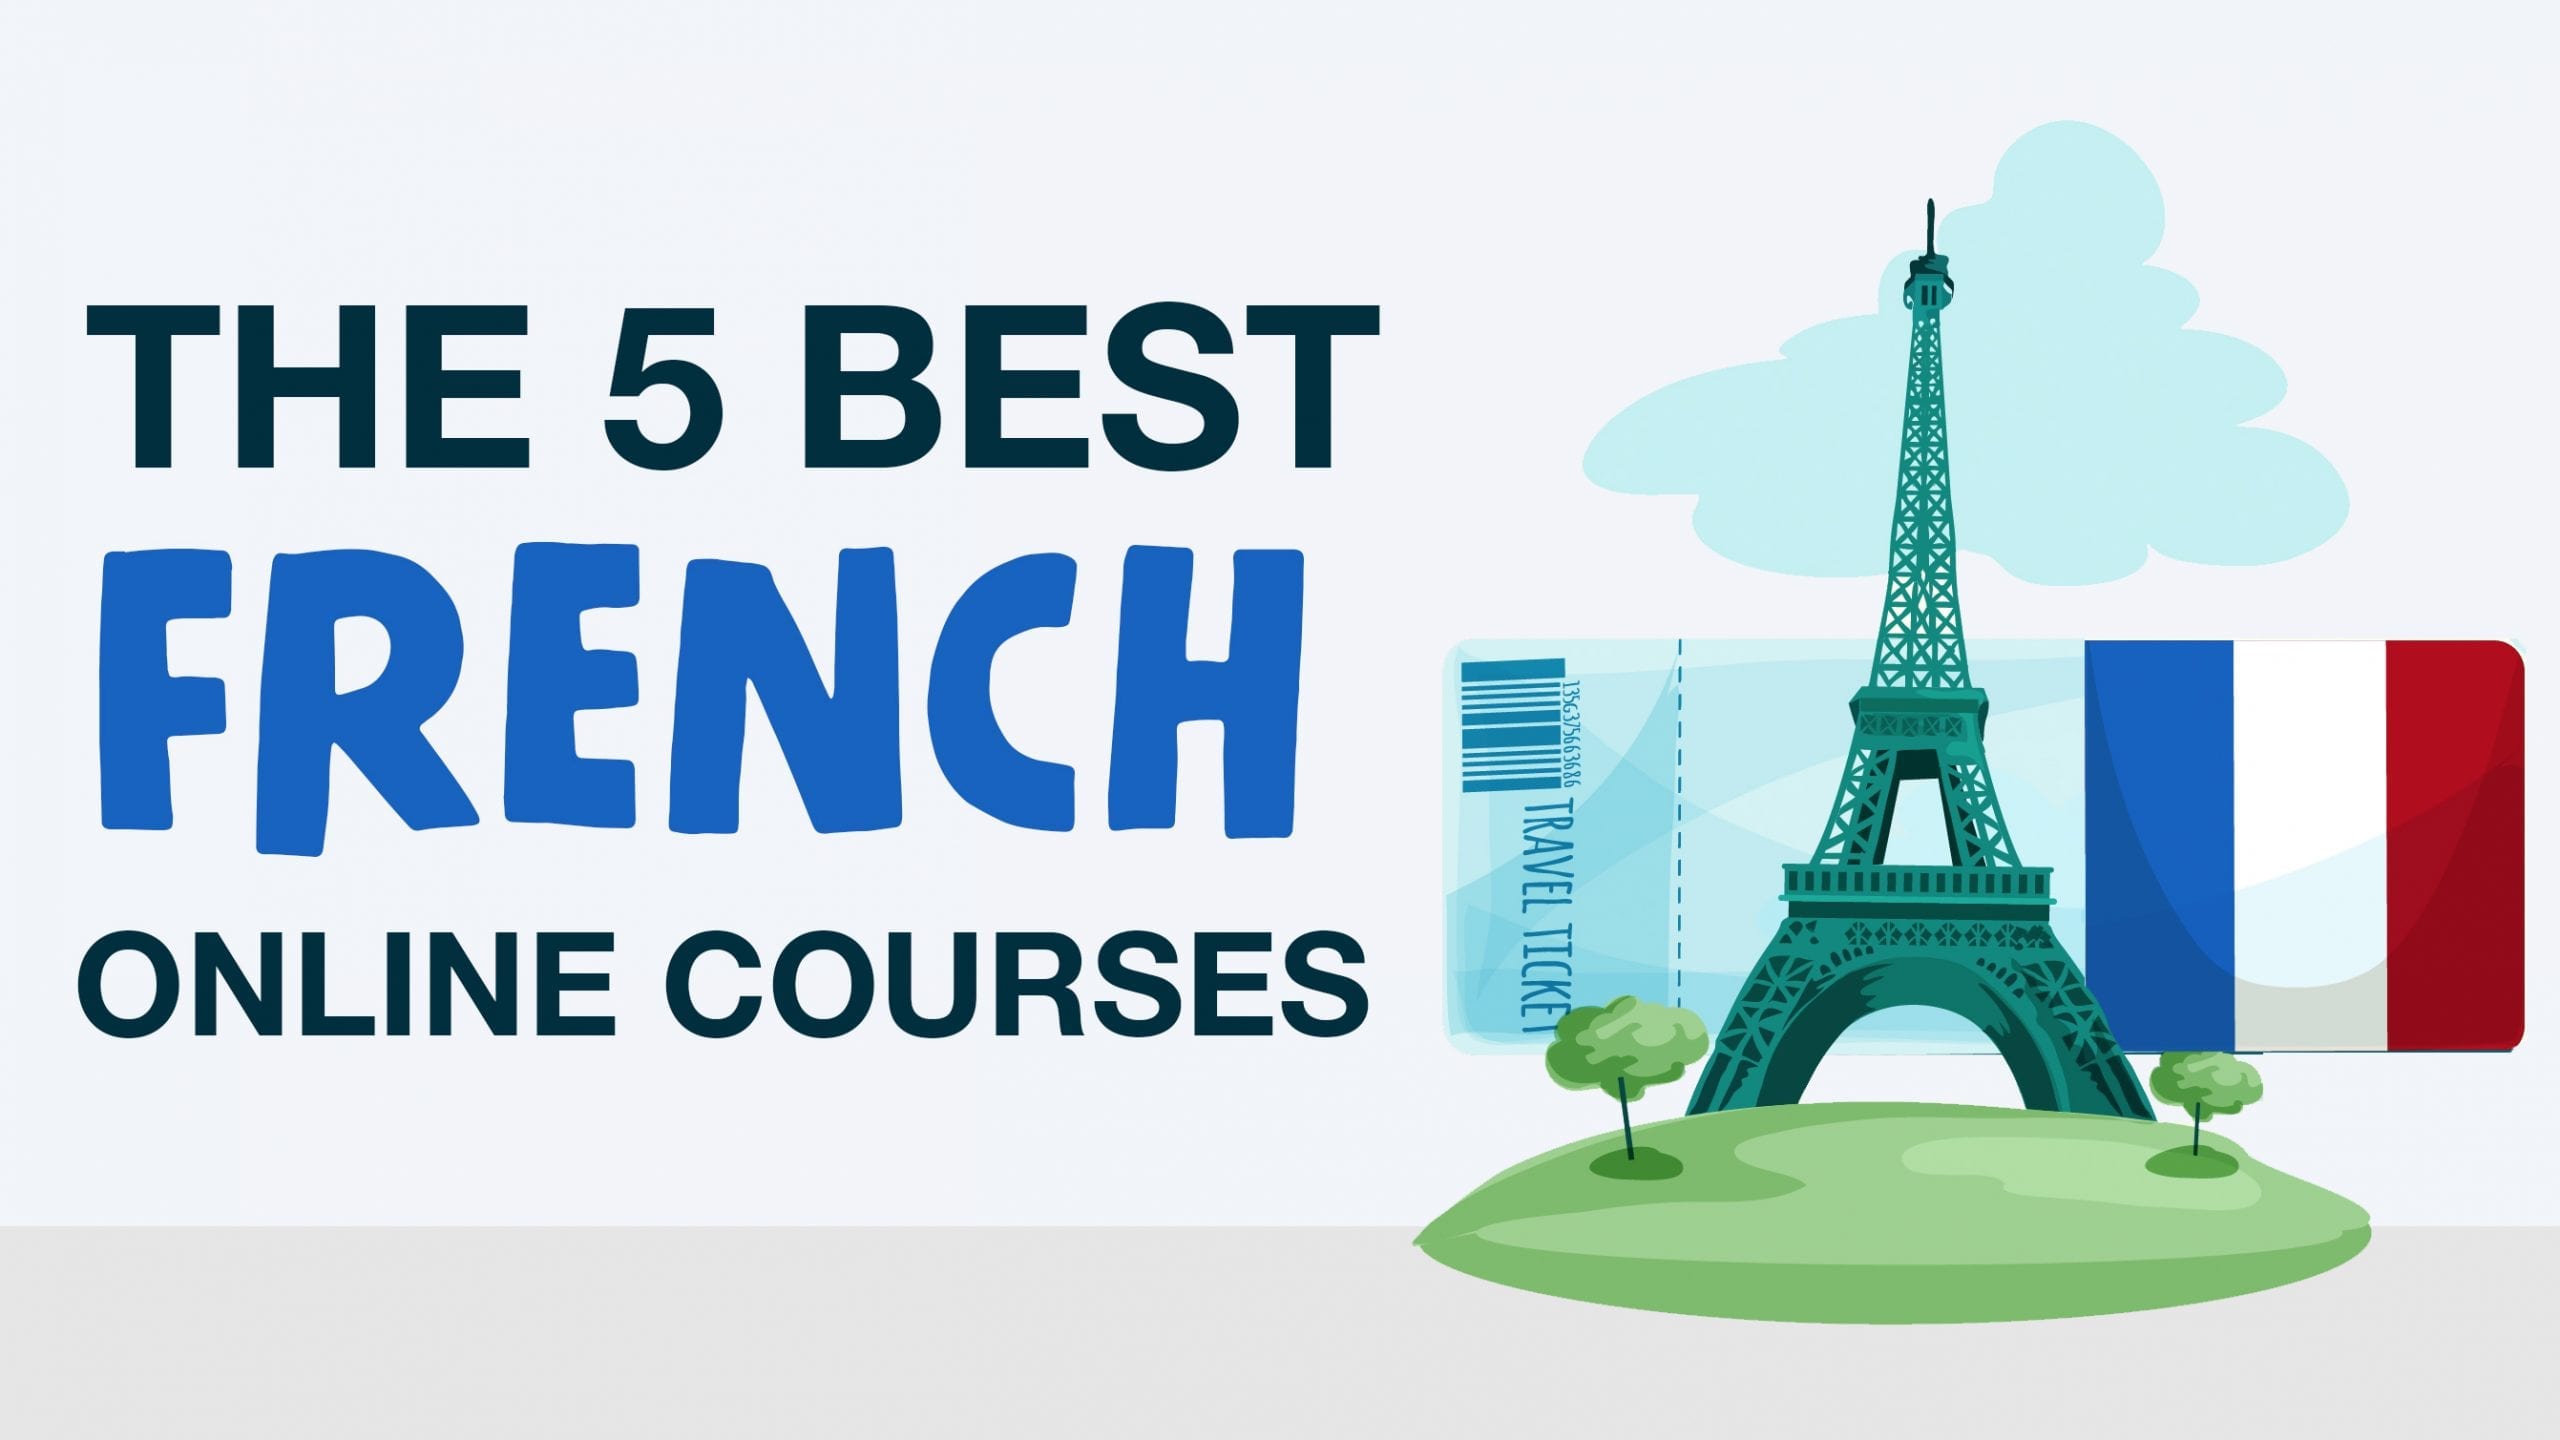 course work meaning french